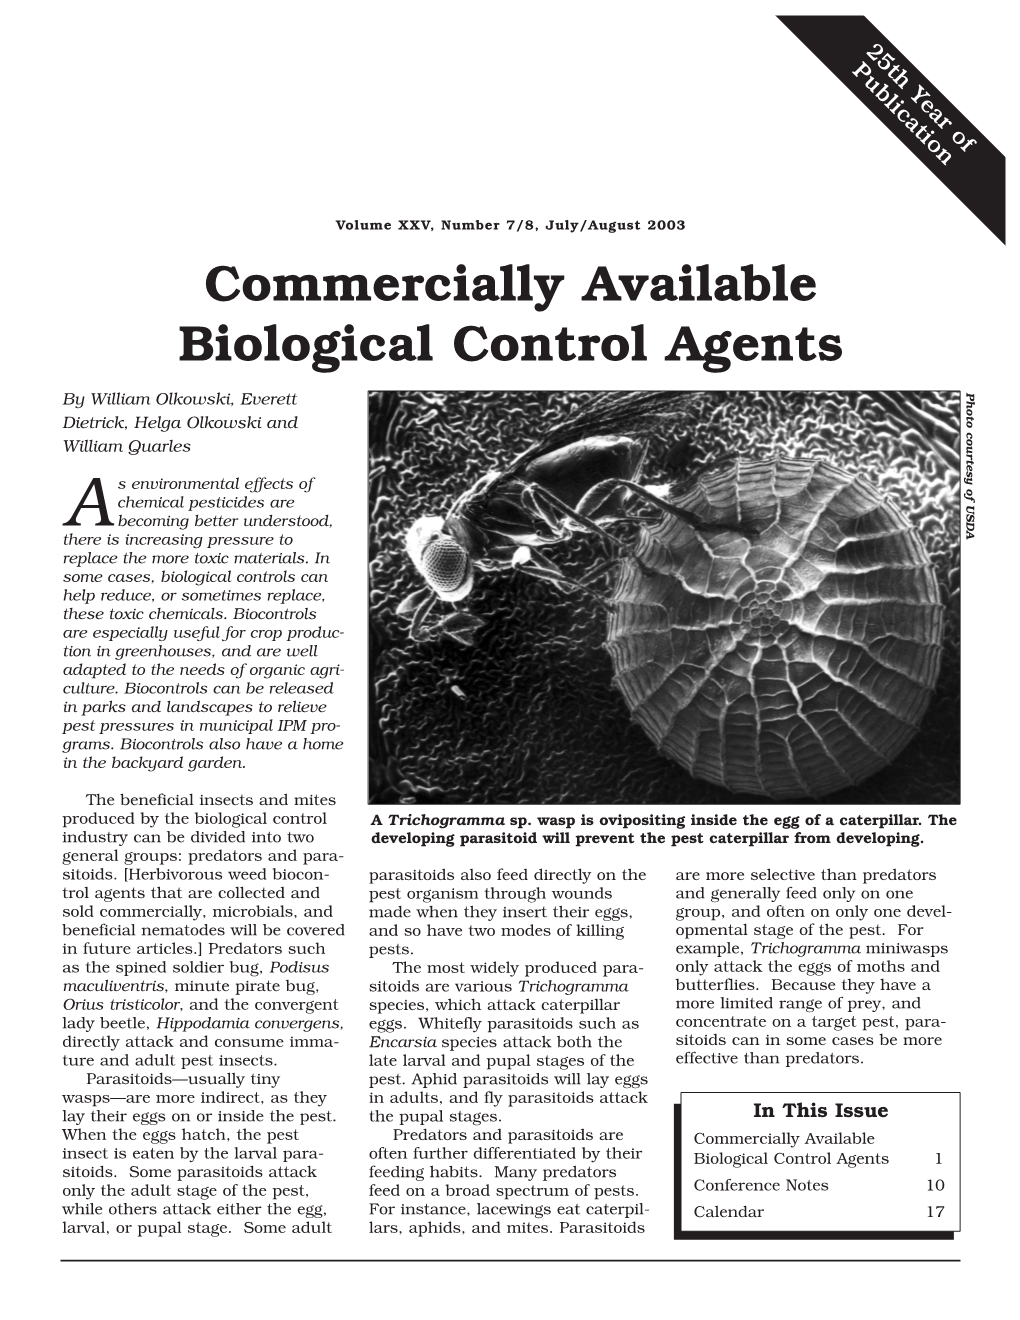 Commercially Available Biocontrol Agents